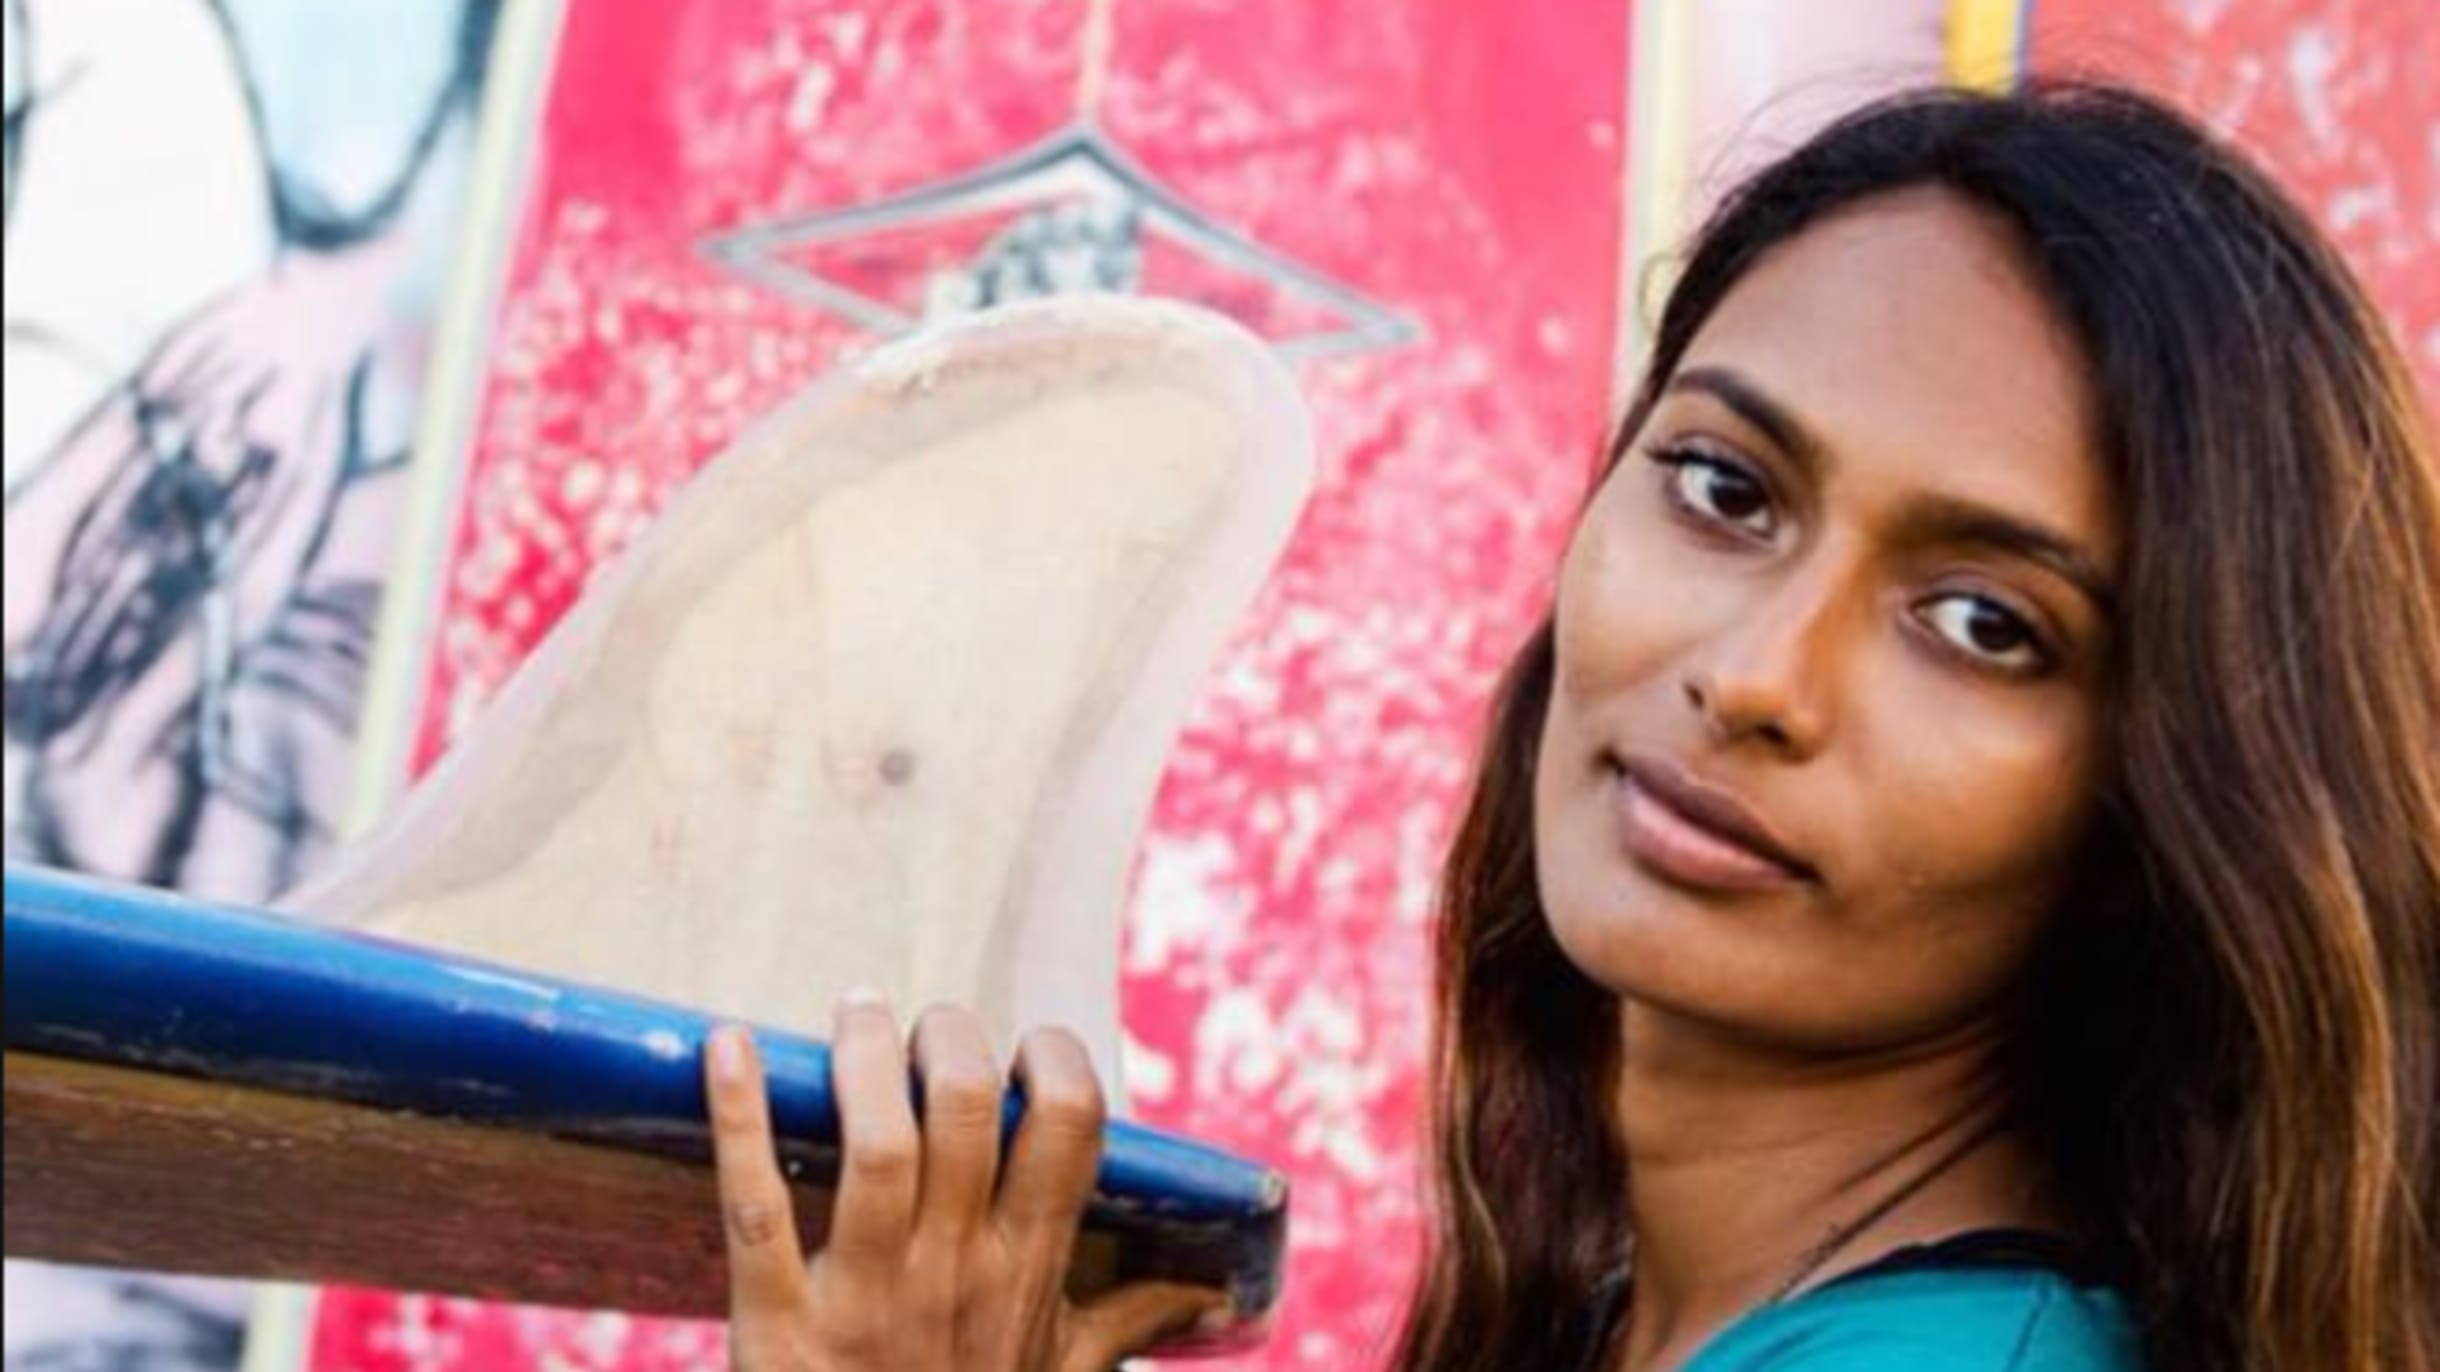 India's First Female Surfer Stars in ROXY Campaign